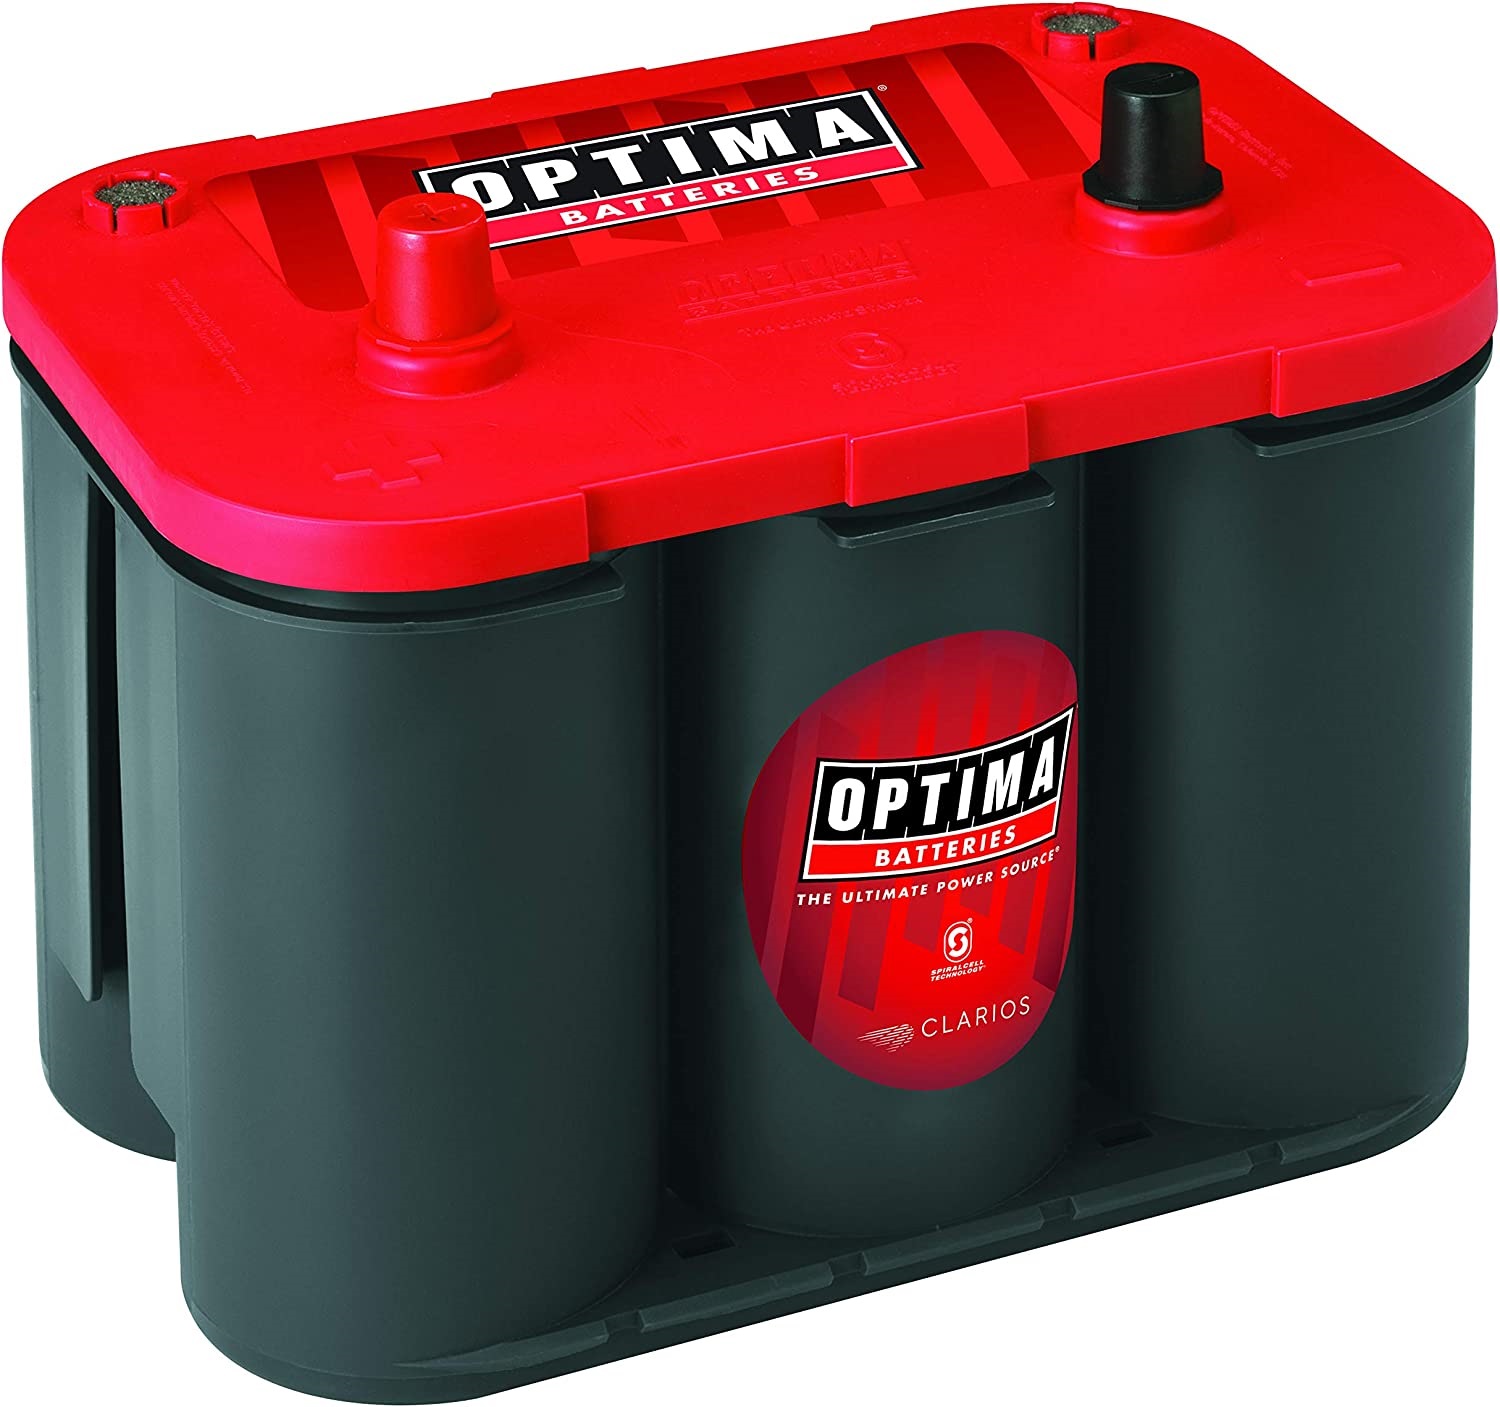 Optima RedTop Starting 12-Volt Battery 9002-002 replaces Jegs 753-9002-002 4